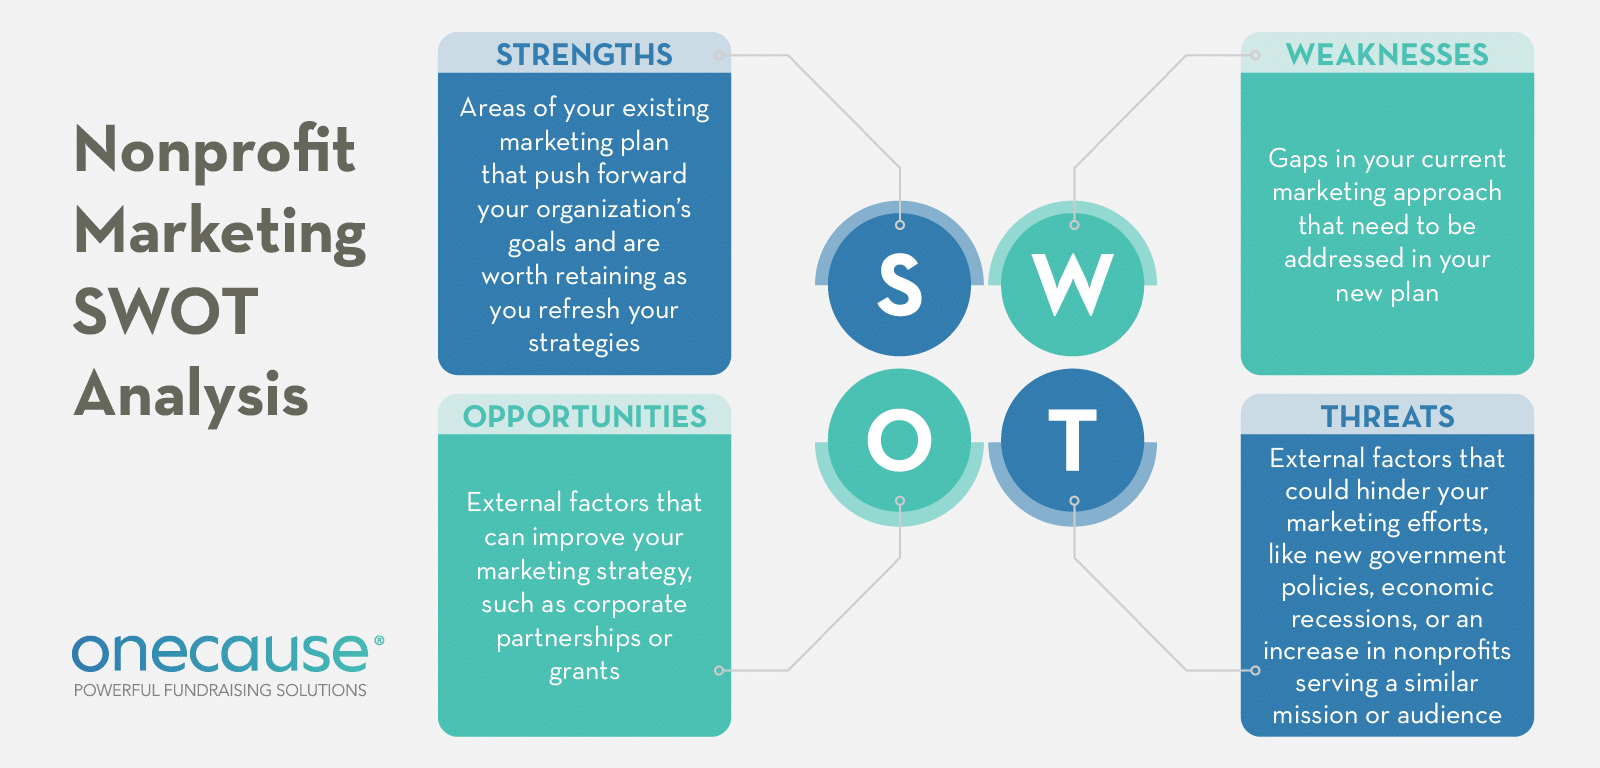 A SWOT analysis can help you reflect on your existing nonprofit marketing plan’s performance.